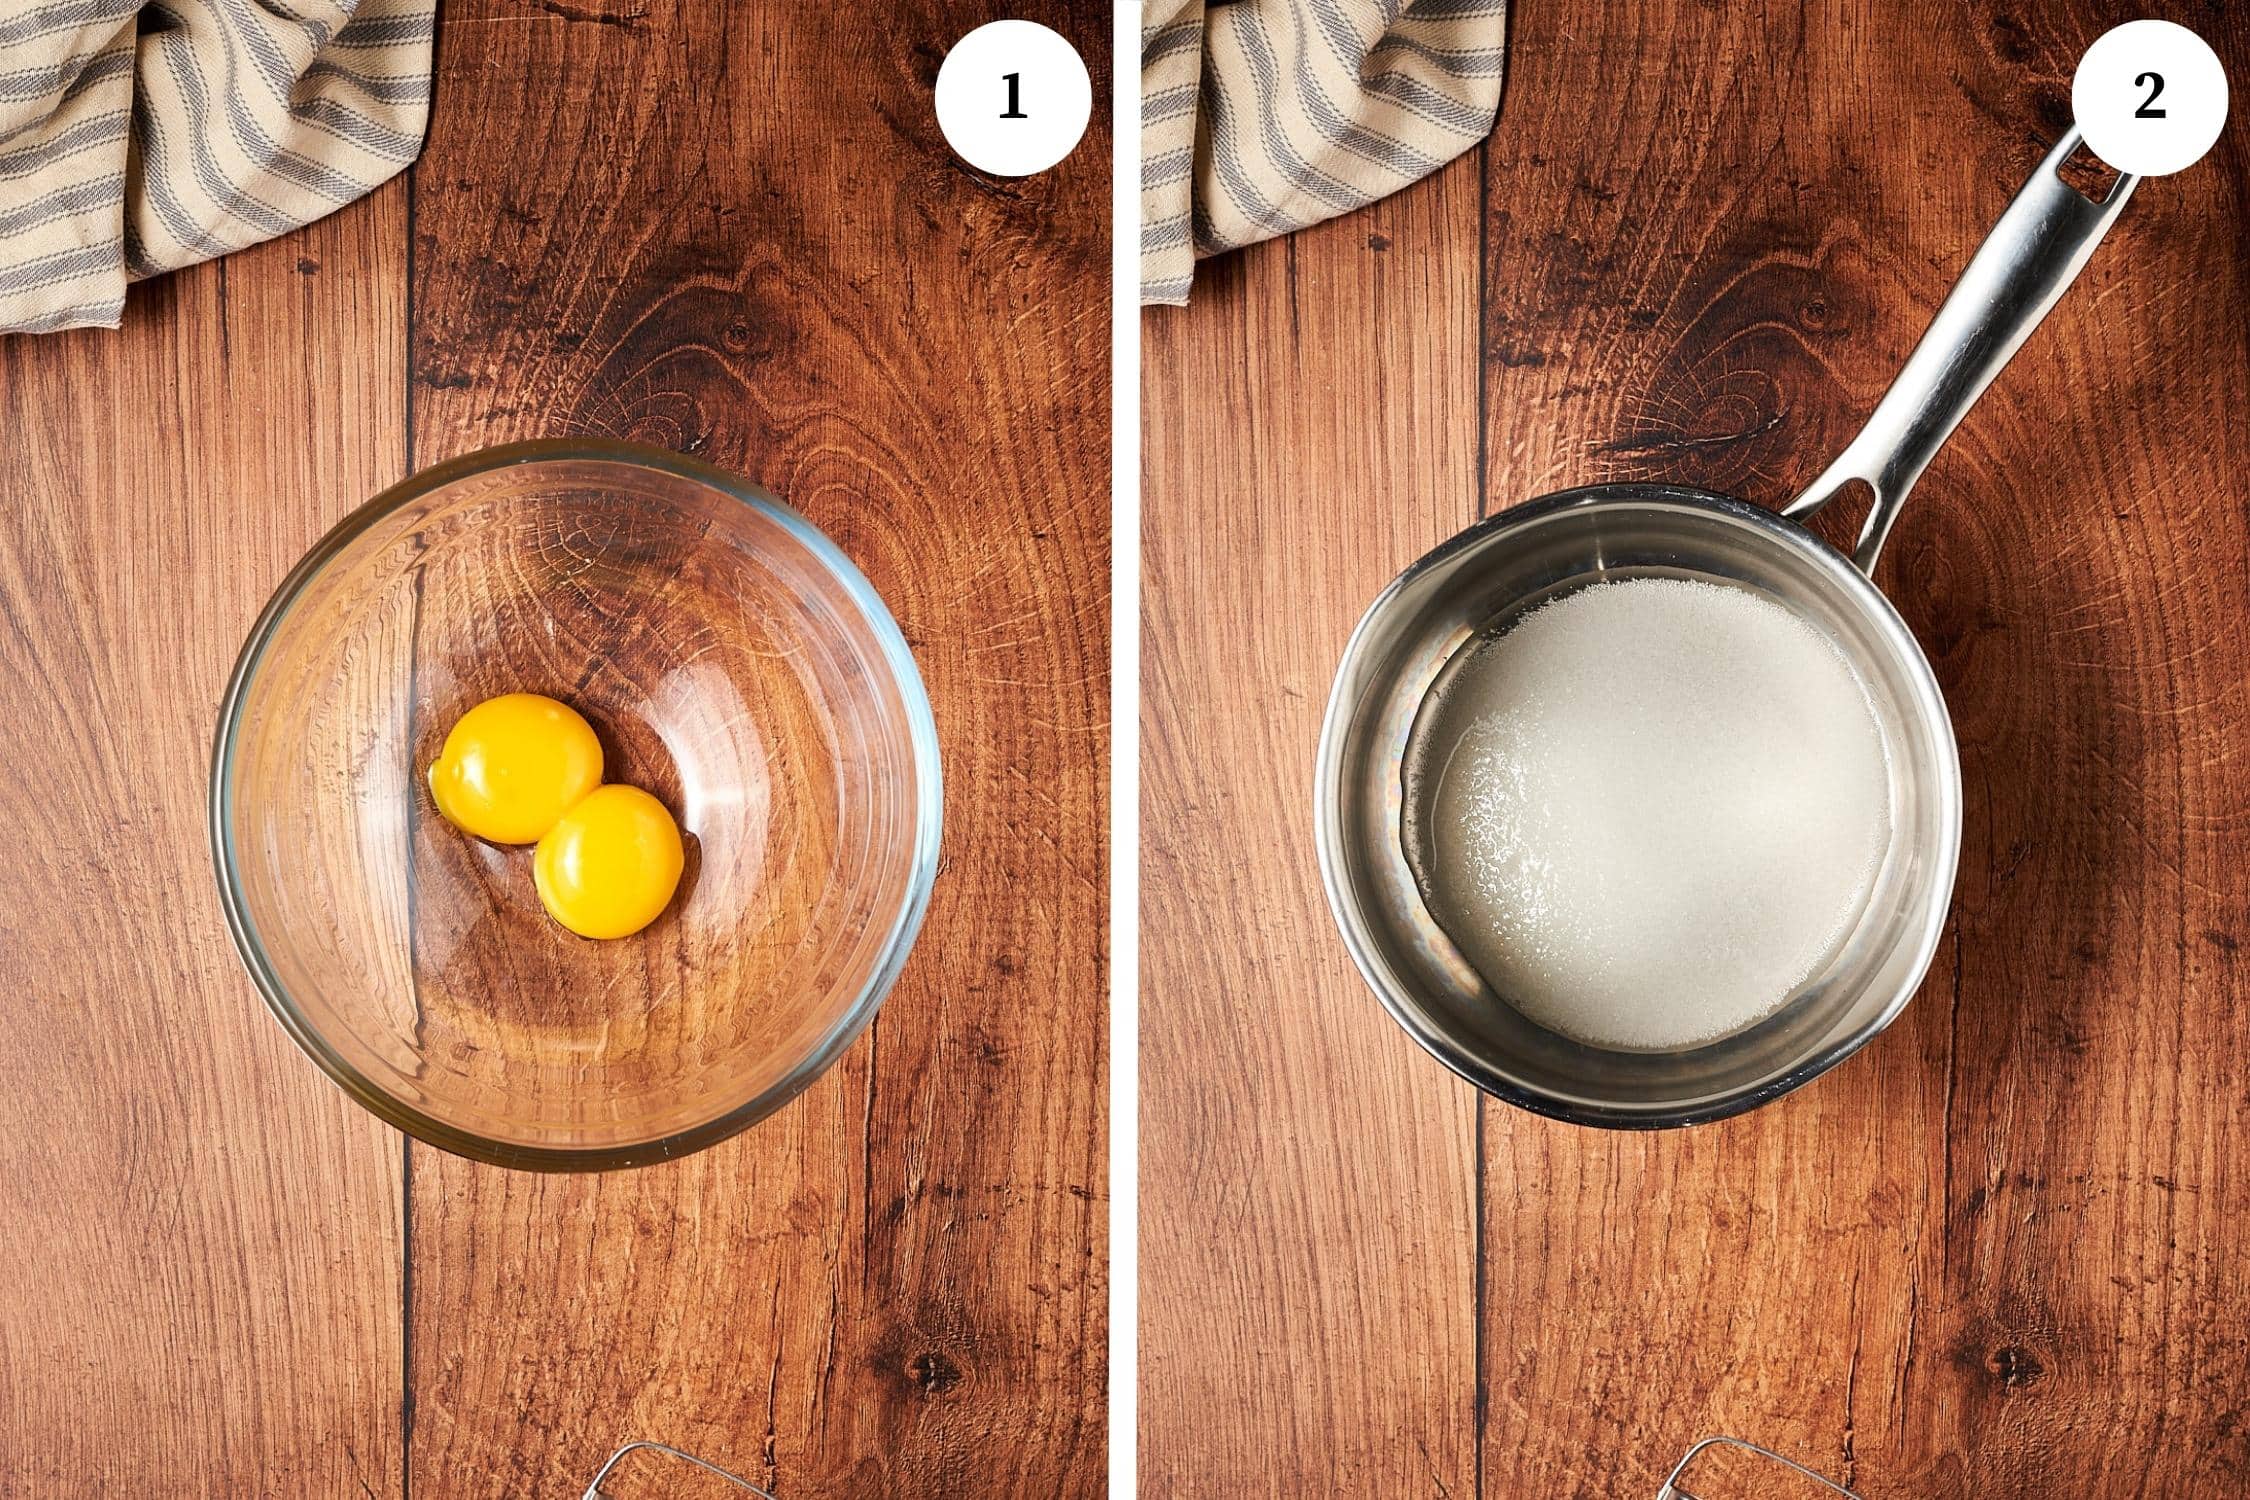 Step by step pictures for italian mascarpone cream: separate the egg yolks, in a pan dissolve the sugar in water